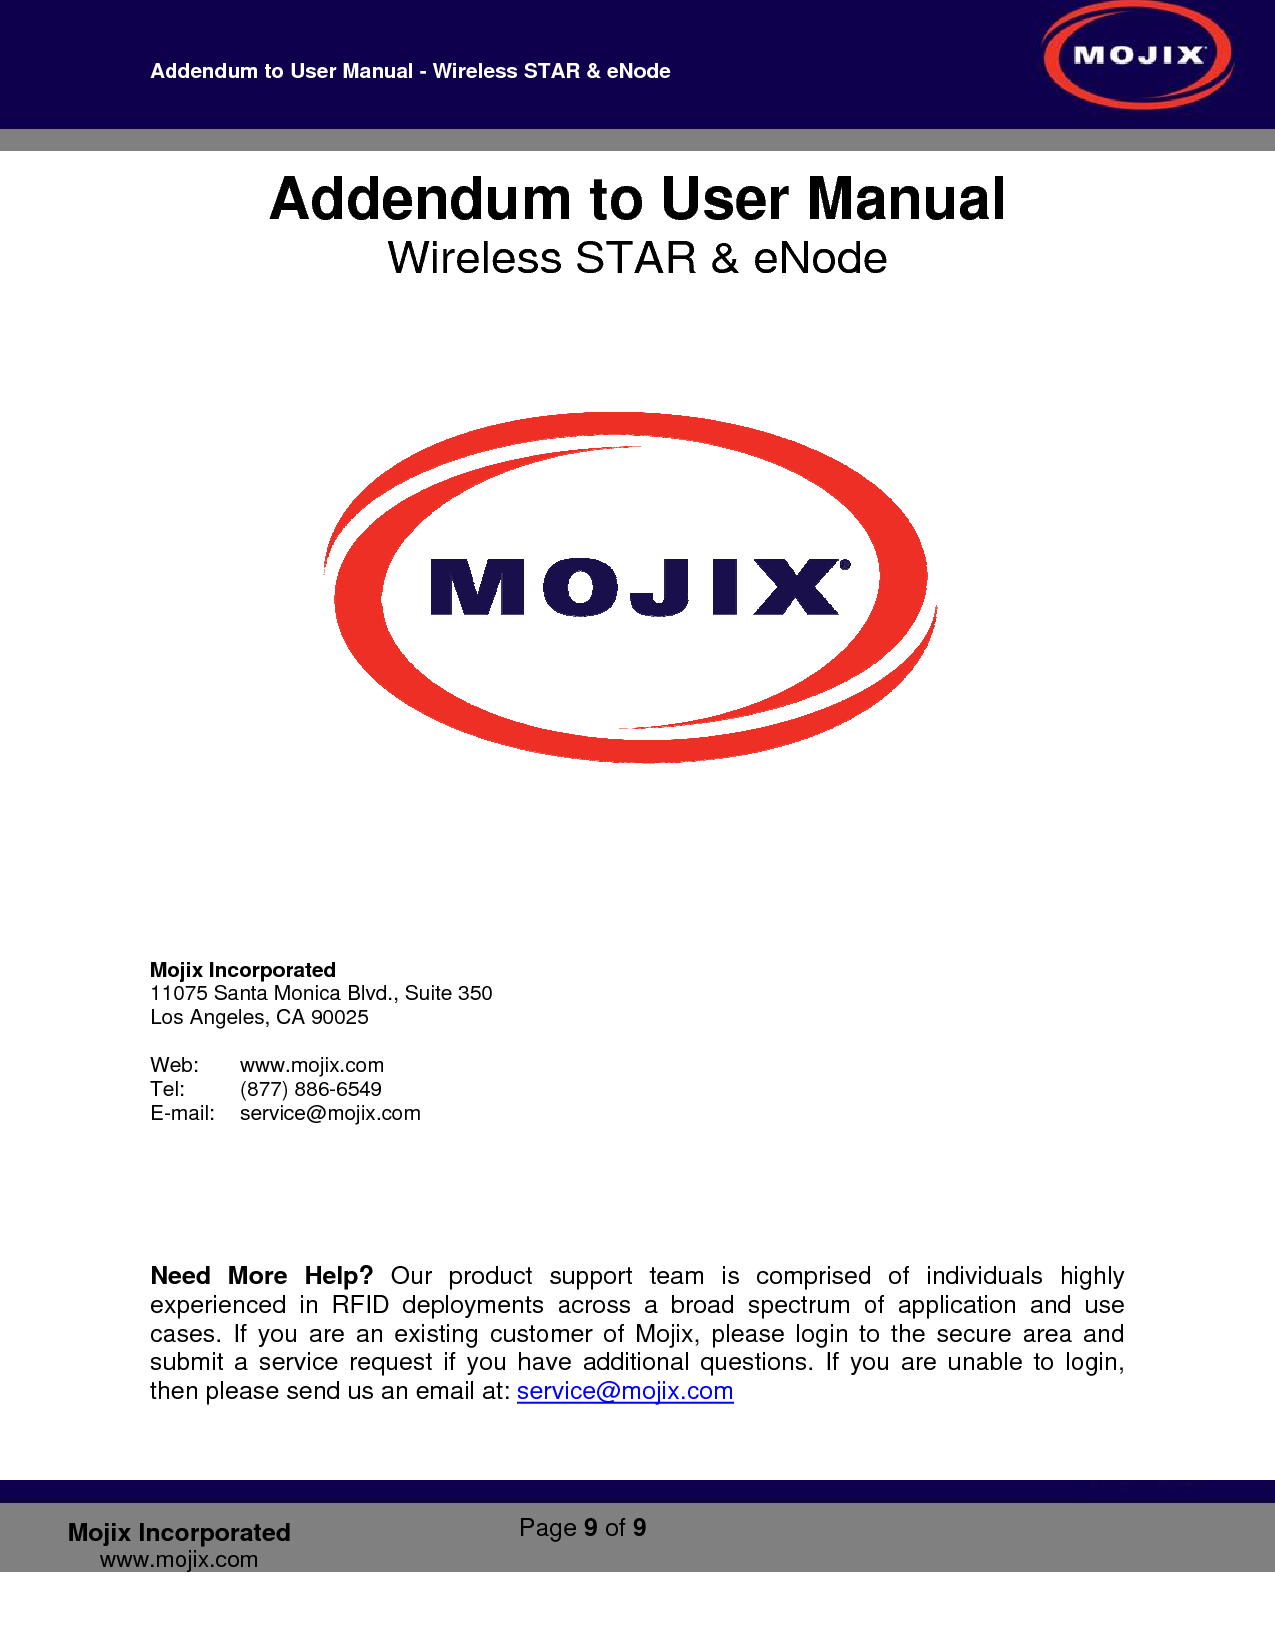 Addendum to User Manual - Wireless STAR &amp; eNode        Page 9 of 9   Mojix Incorporated www.mojix.com Addendum to User Manual Wireless STAR &amp; eNode          Mojix Incorporated 11075 Santa Monica Blvd., Suite 350 Los Angeles, CA 90025   Web:   www.mojix.com Tel:    (877) 886-6549 E-mail:    service@mojix.com             Need More Help? Our product support team is comprised of individuals highly experienced in RFID deployments across a broad spectrum of application and use cases. If you are an existing customer of Mojix, please login to the secure area and submit a service request if you have additional questions. If you are unable to login, then please send us an email at: service@mojix.com   